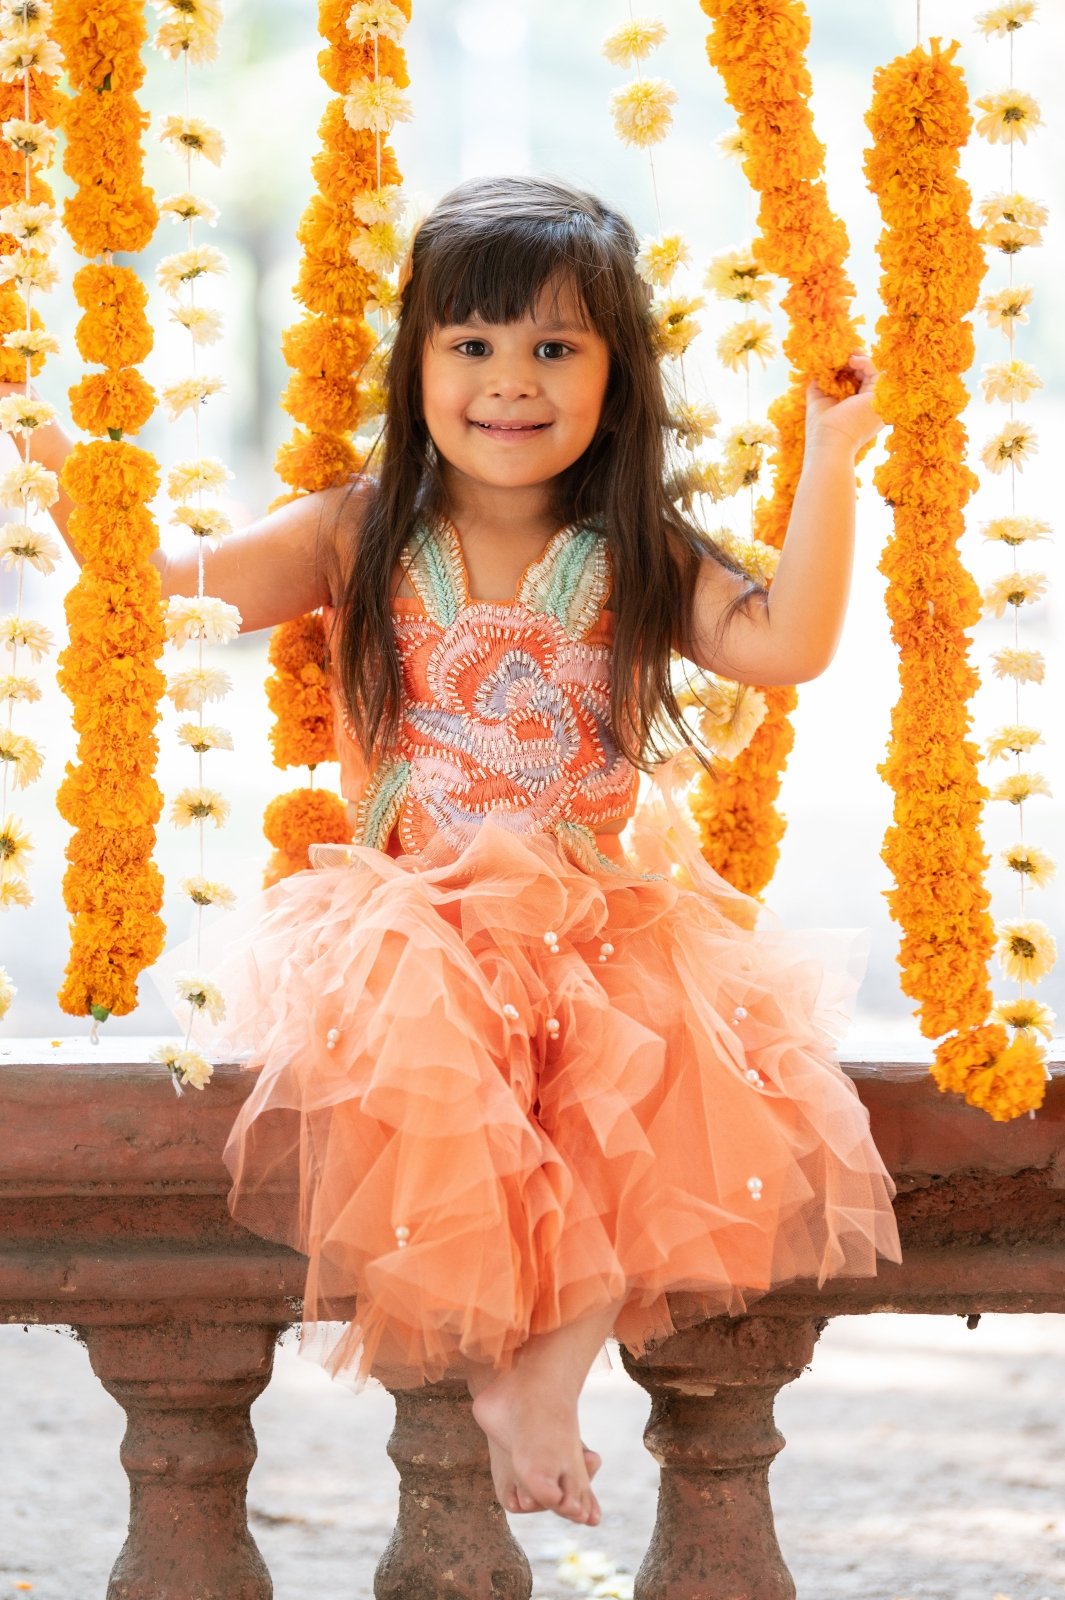 Vibrant Orange tulle style dress with flower embroidery on top - Kirti Agarwal